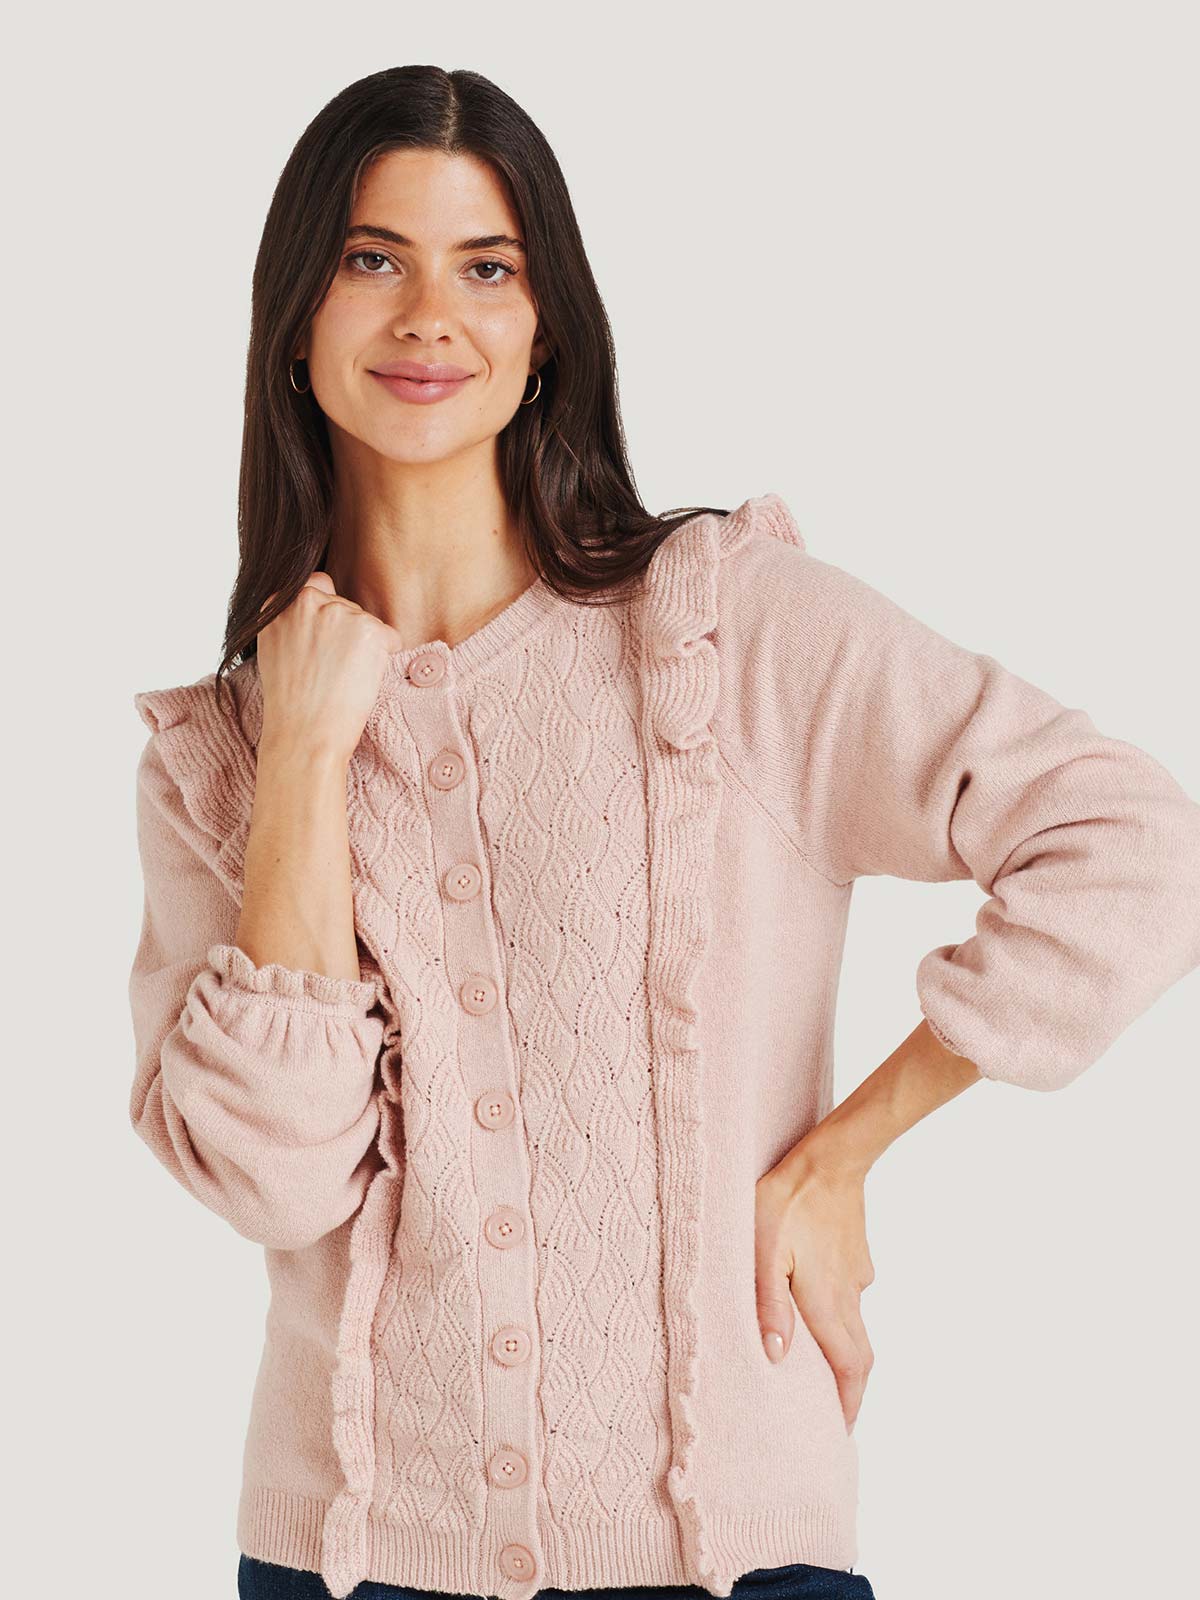 Aguilar Organic Cotton Fluffy Cardigan - Faded Rose Pink